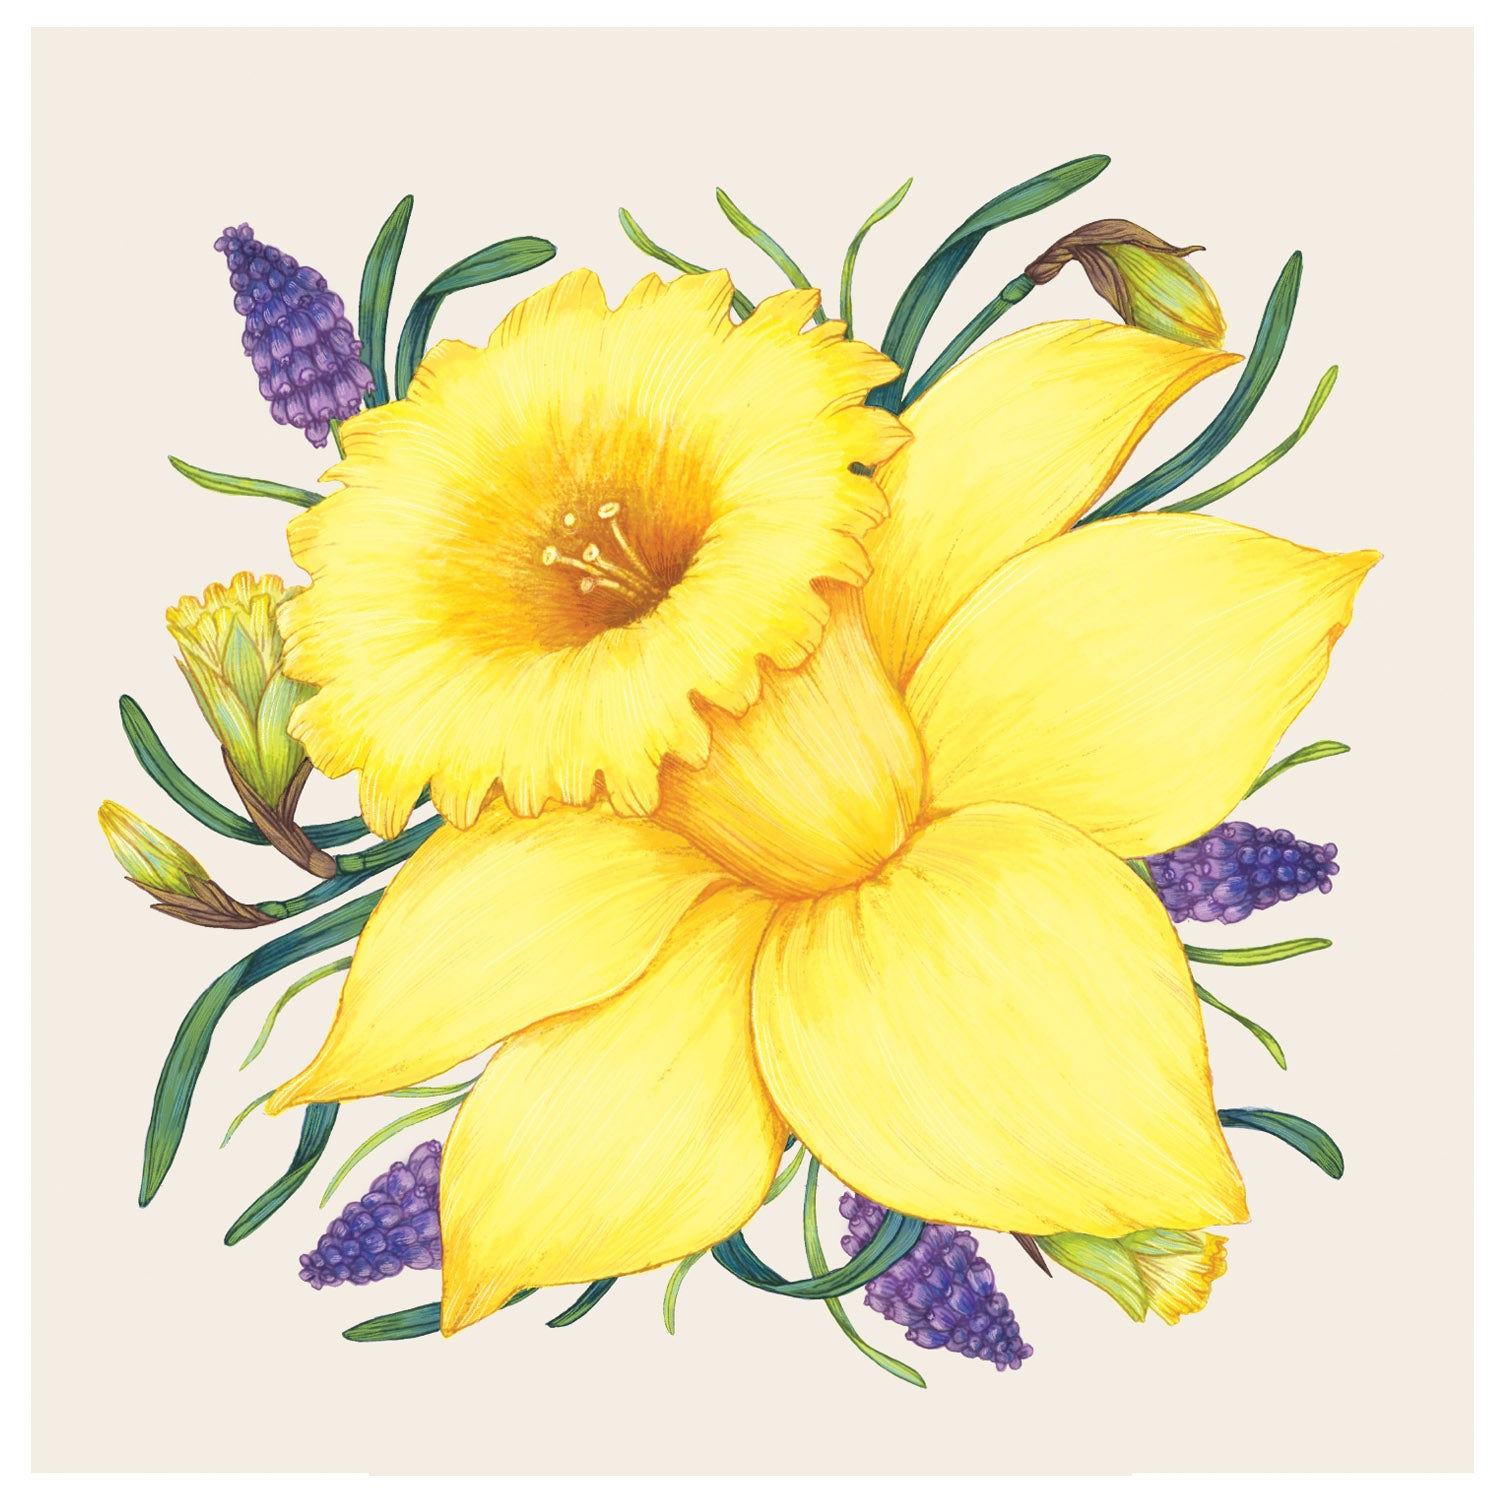 An illustration of a yellow Daffodil Napkins flower from Hester &amp; Cook, blooming in the spring.